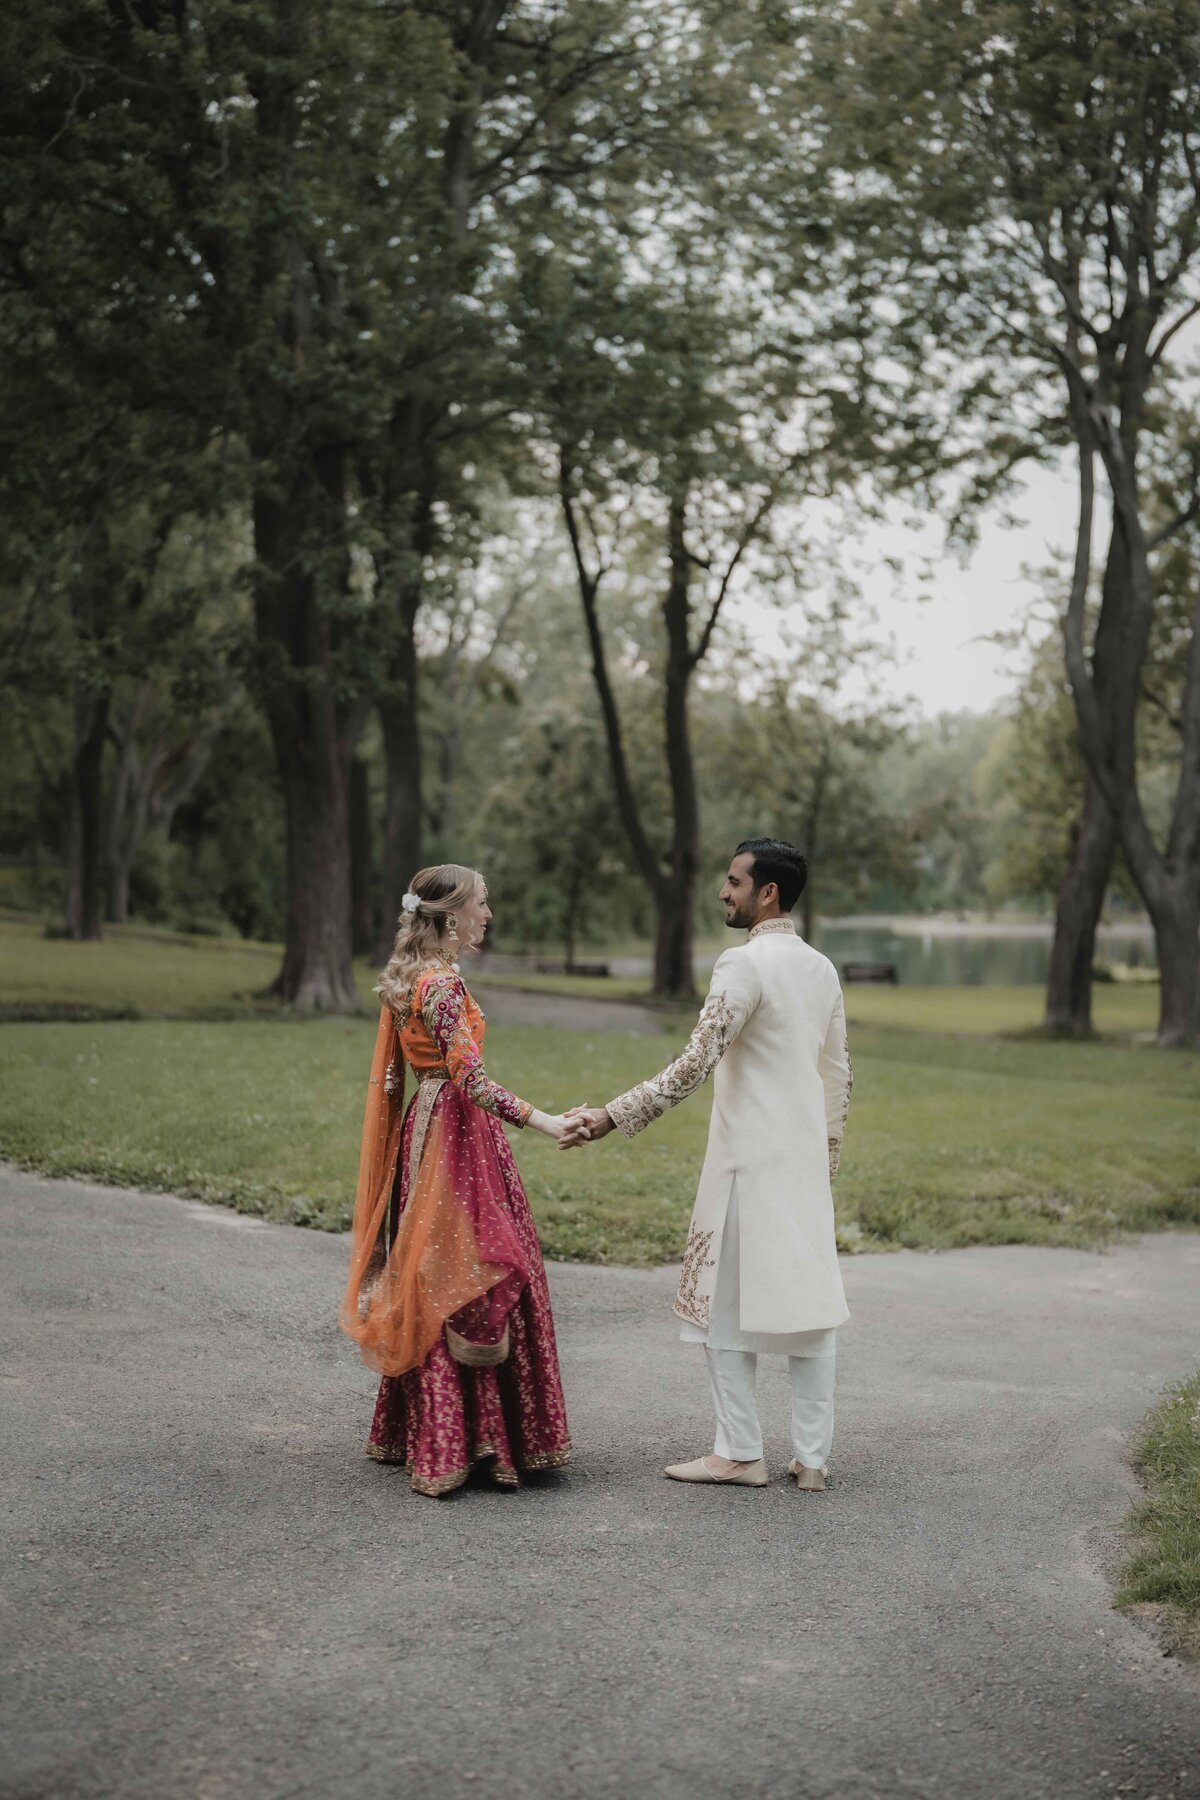 Couple's photo before the Mendhi celebration at Parc Lafontaine in Montreal.